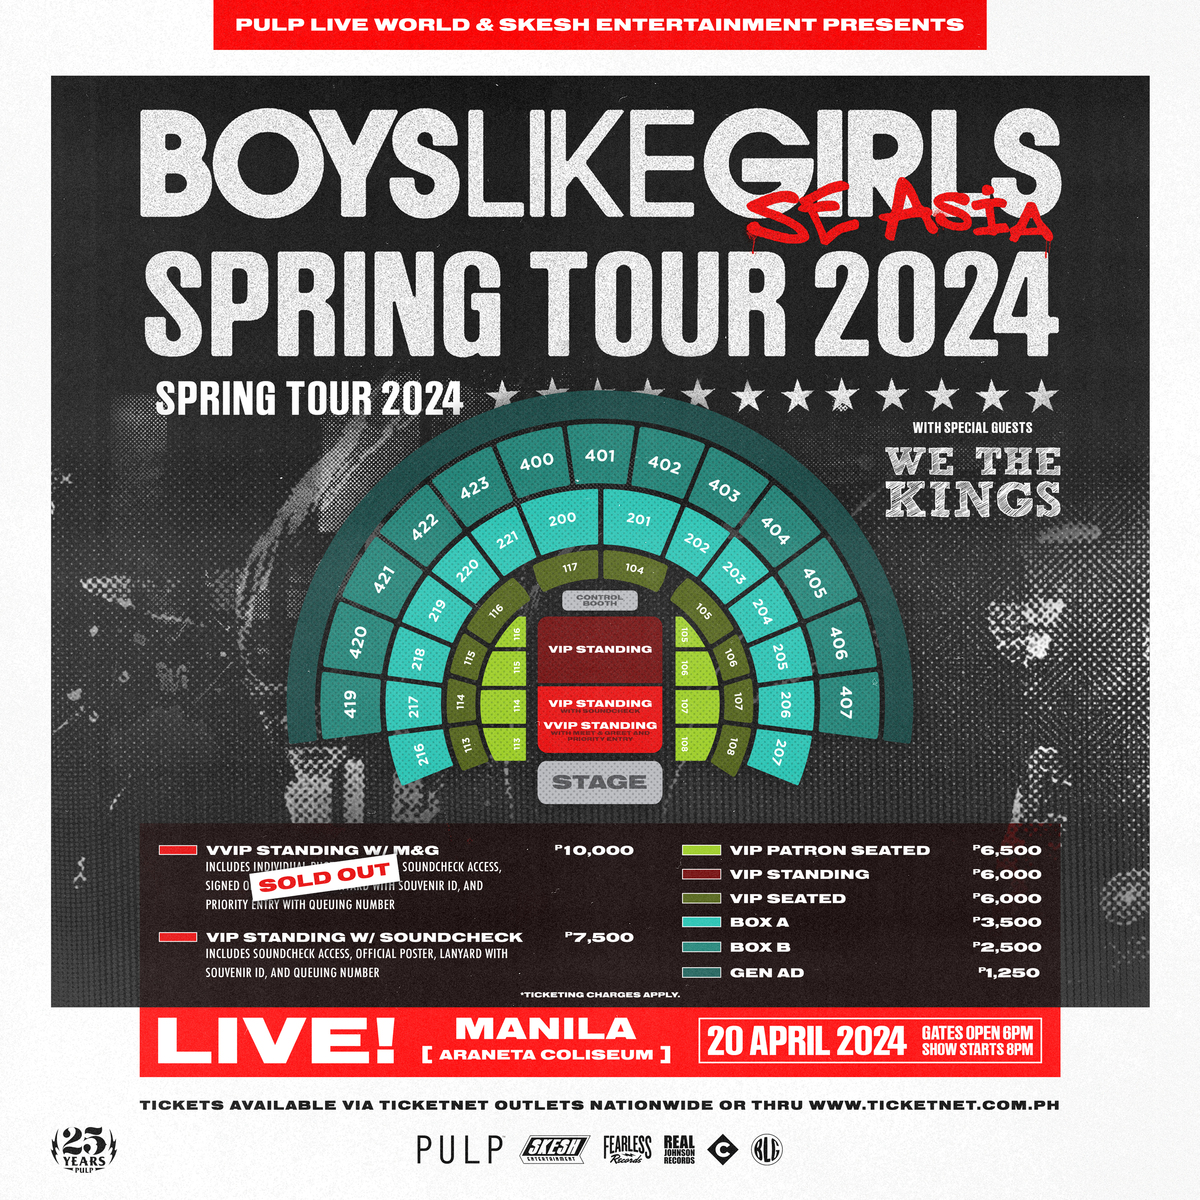 🚨 LISTEN UP! 🚨 Due to overwhelming demand, we've opened the General Admission section of the Araneta Coliseum for the BOYS LIKE GIRLS SPRING TOUR 2024 IN MANILA. 🎶 Hurry, these additional seats won’t last long! 🏃 You can grab the remaining limited seats from other sections…